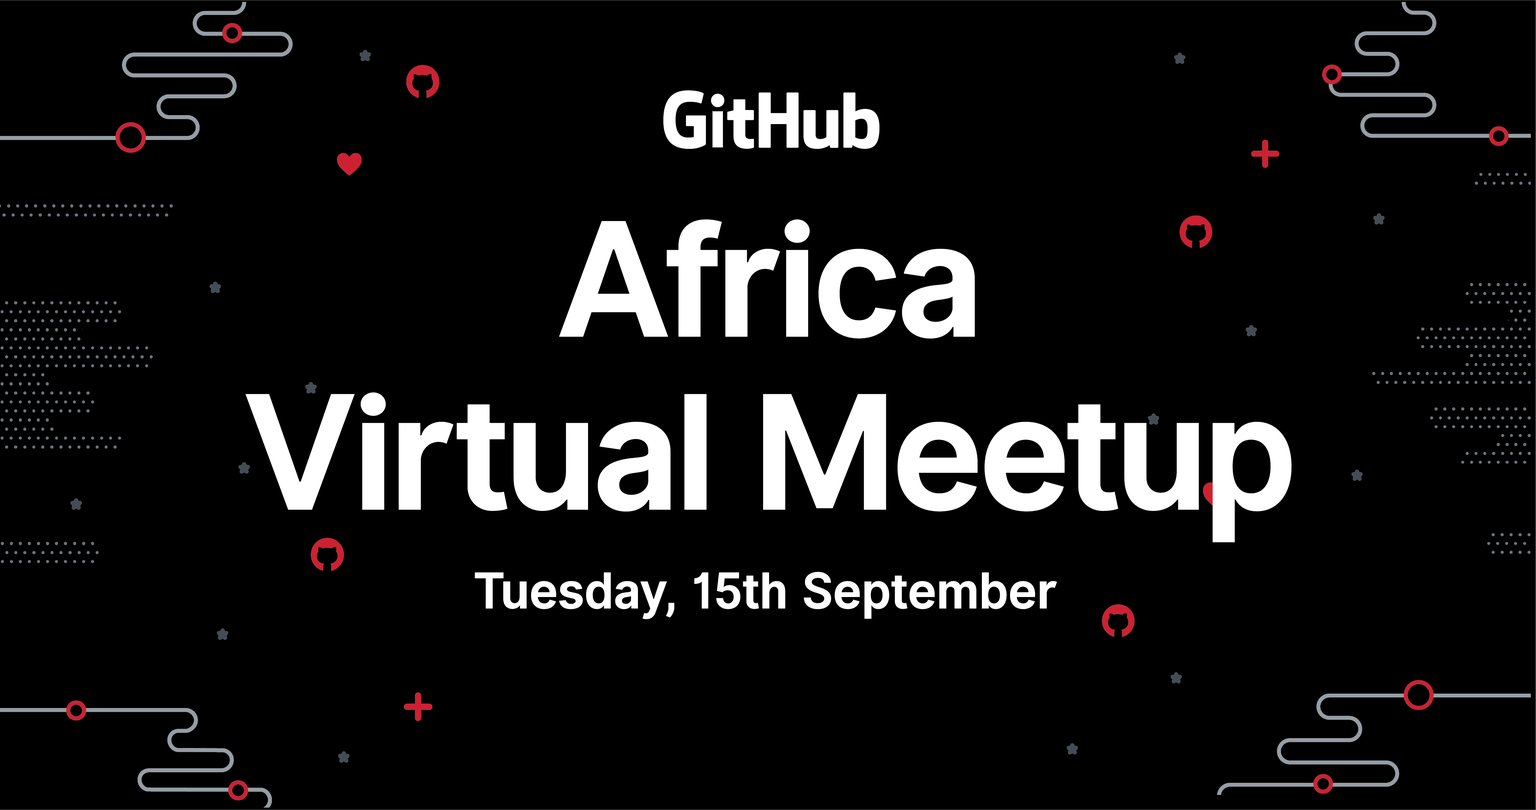 GitHub hosts first event for developers in Africa